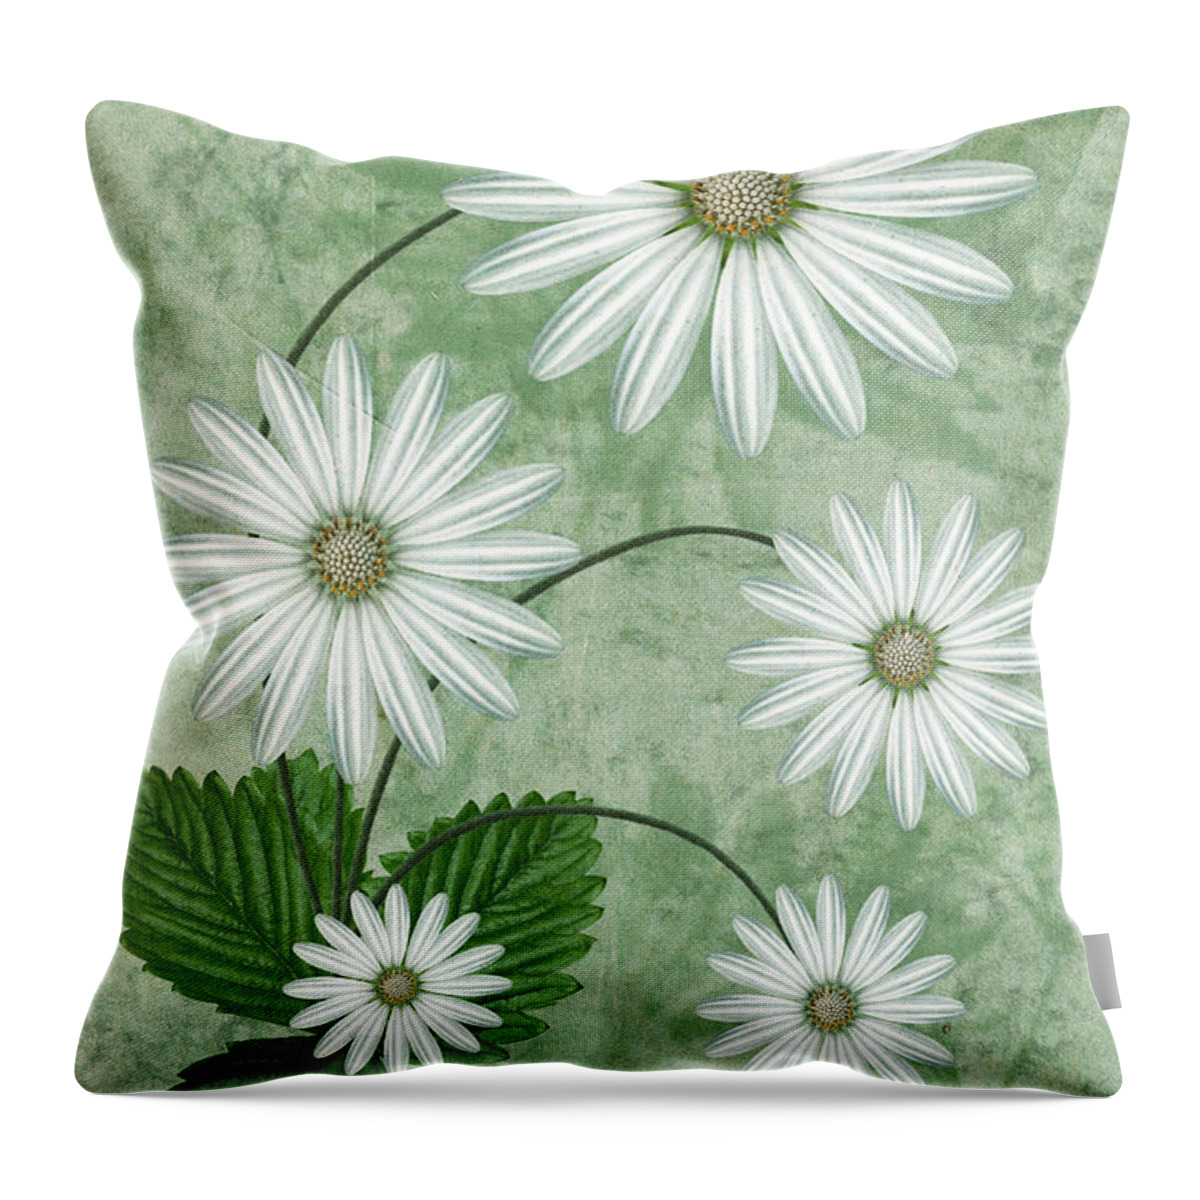 Abstract Flowers Throw Pillow featuring the digital art Cinco by John Edwards